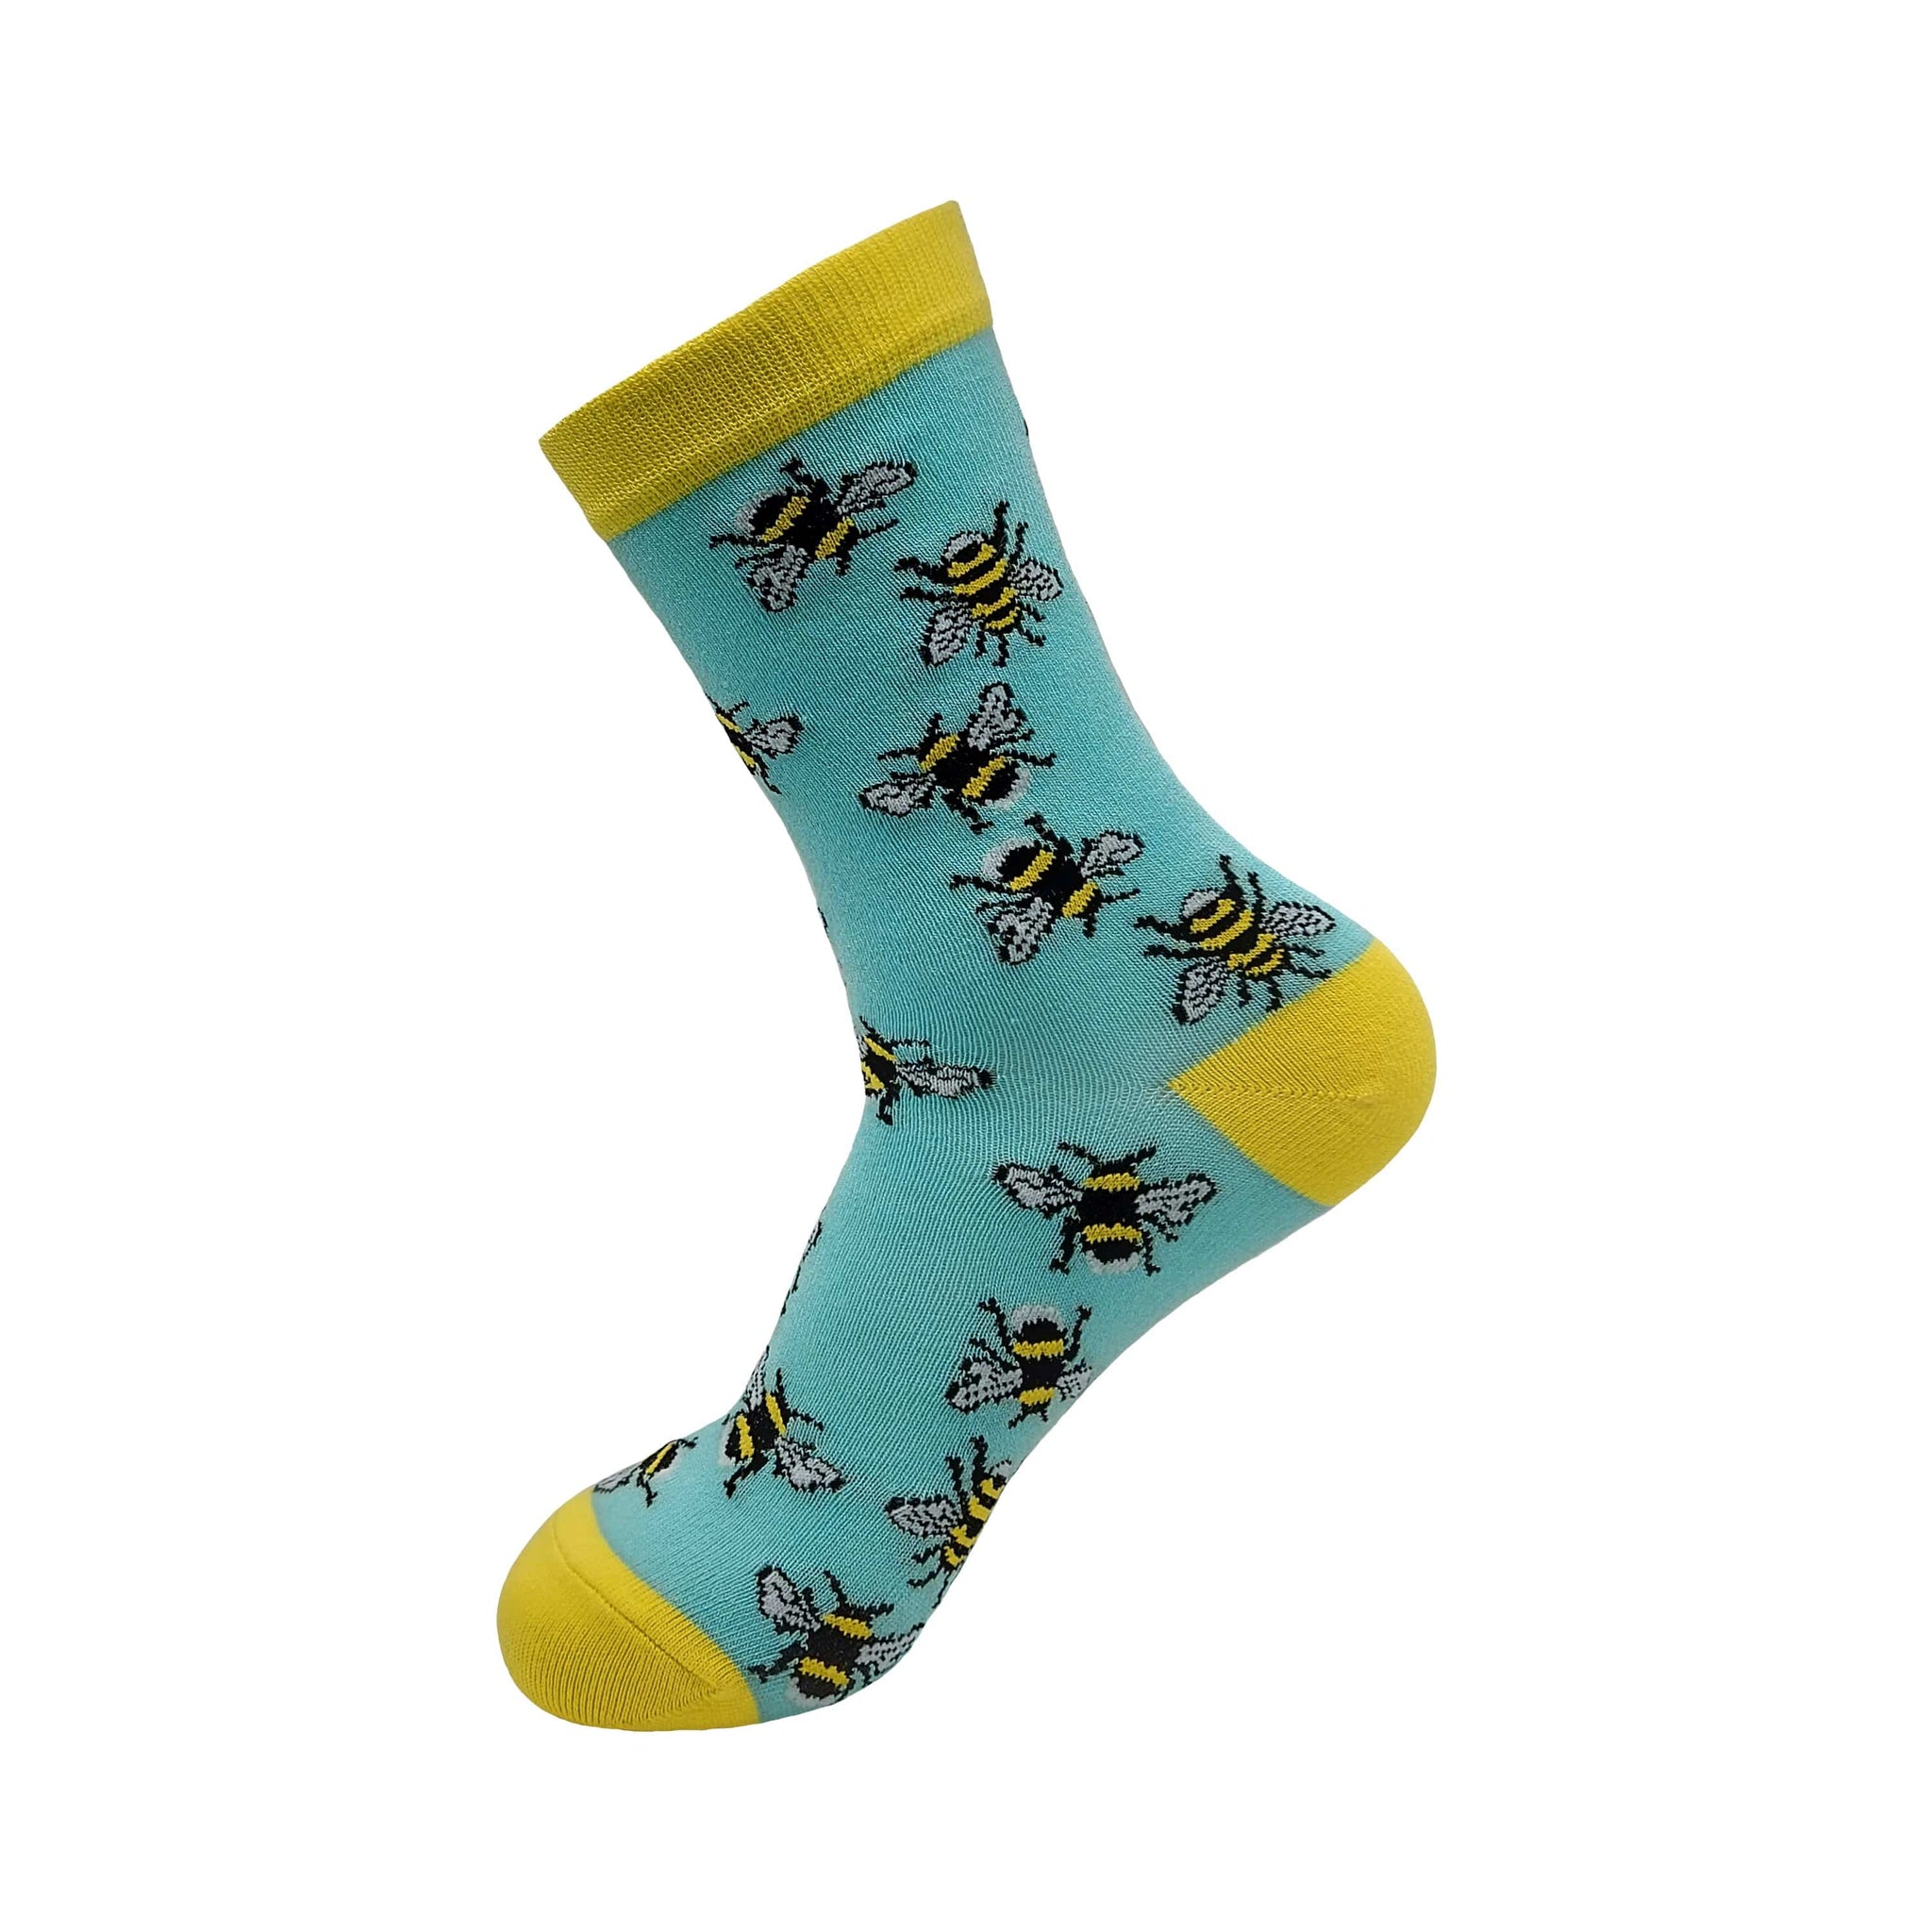 Eco Chic Blue Eco Chic Eco-Friendly Bamboo Socks Bumble Bees